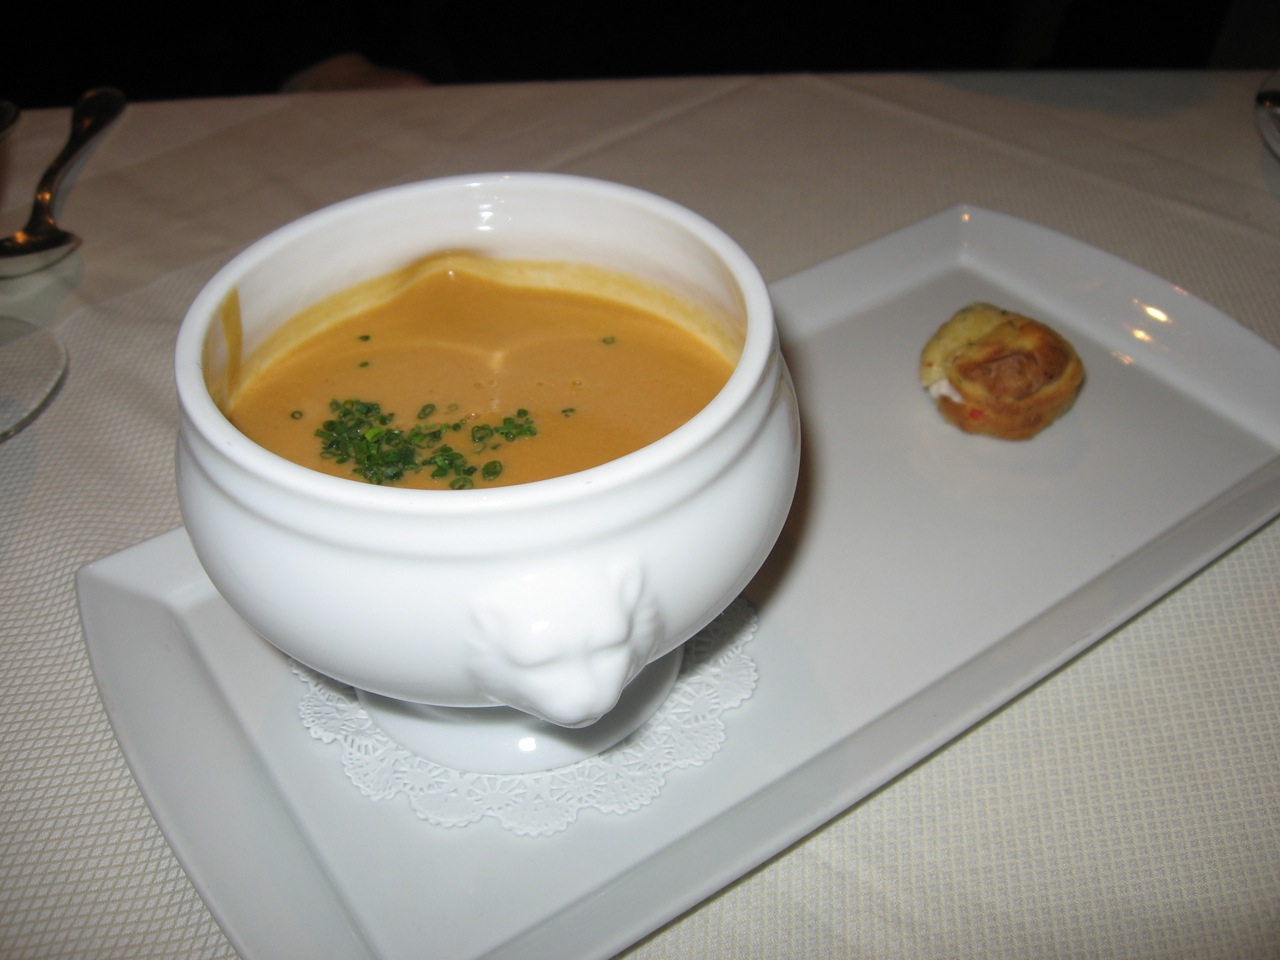 a bowl of soup is on a white plate